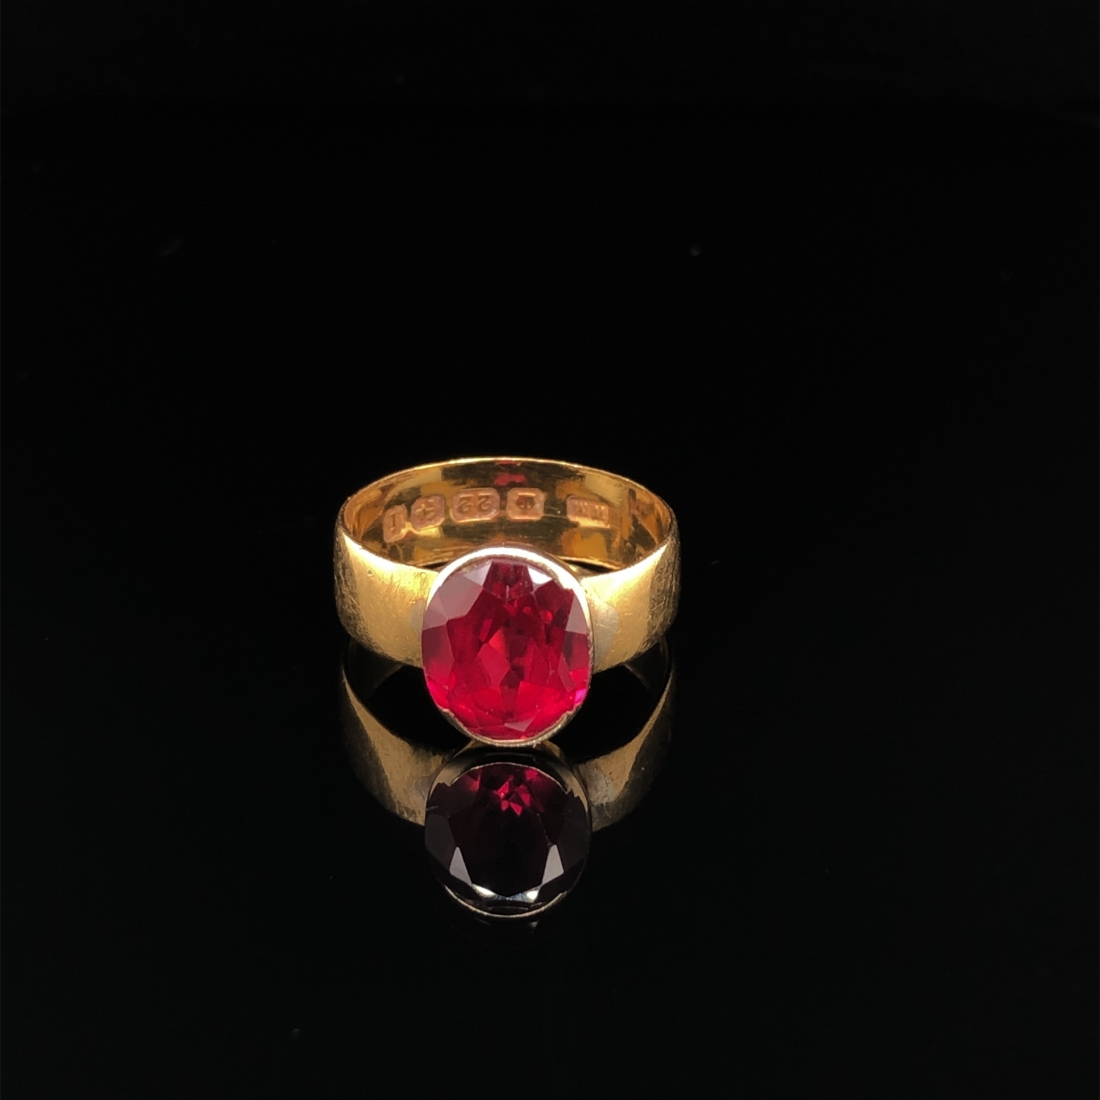 AN ANTIQUE 22ct HALLMARKED GOLD GEMSET RING, WITH A 10ct GOLD SETTING. DATED 1908, BIRMINGHAM. - Image 3 of 10